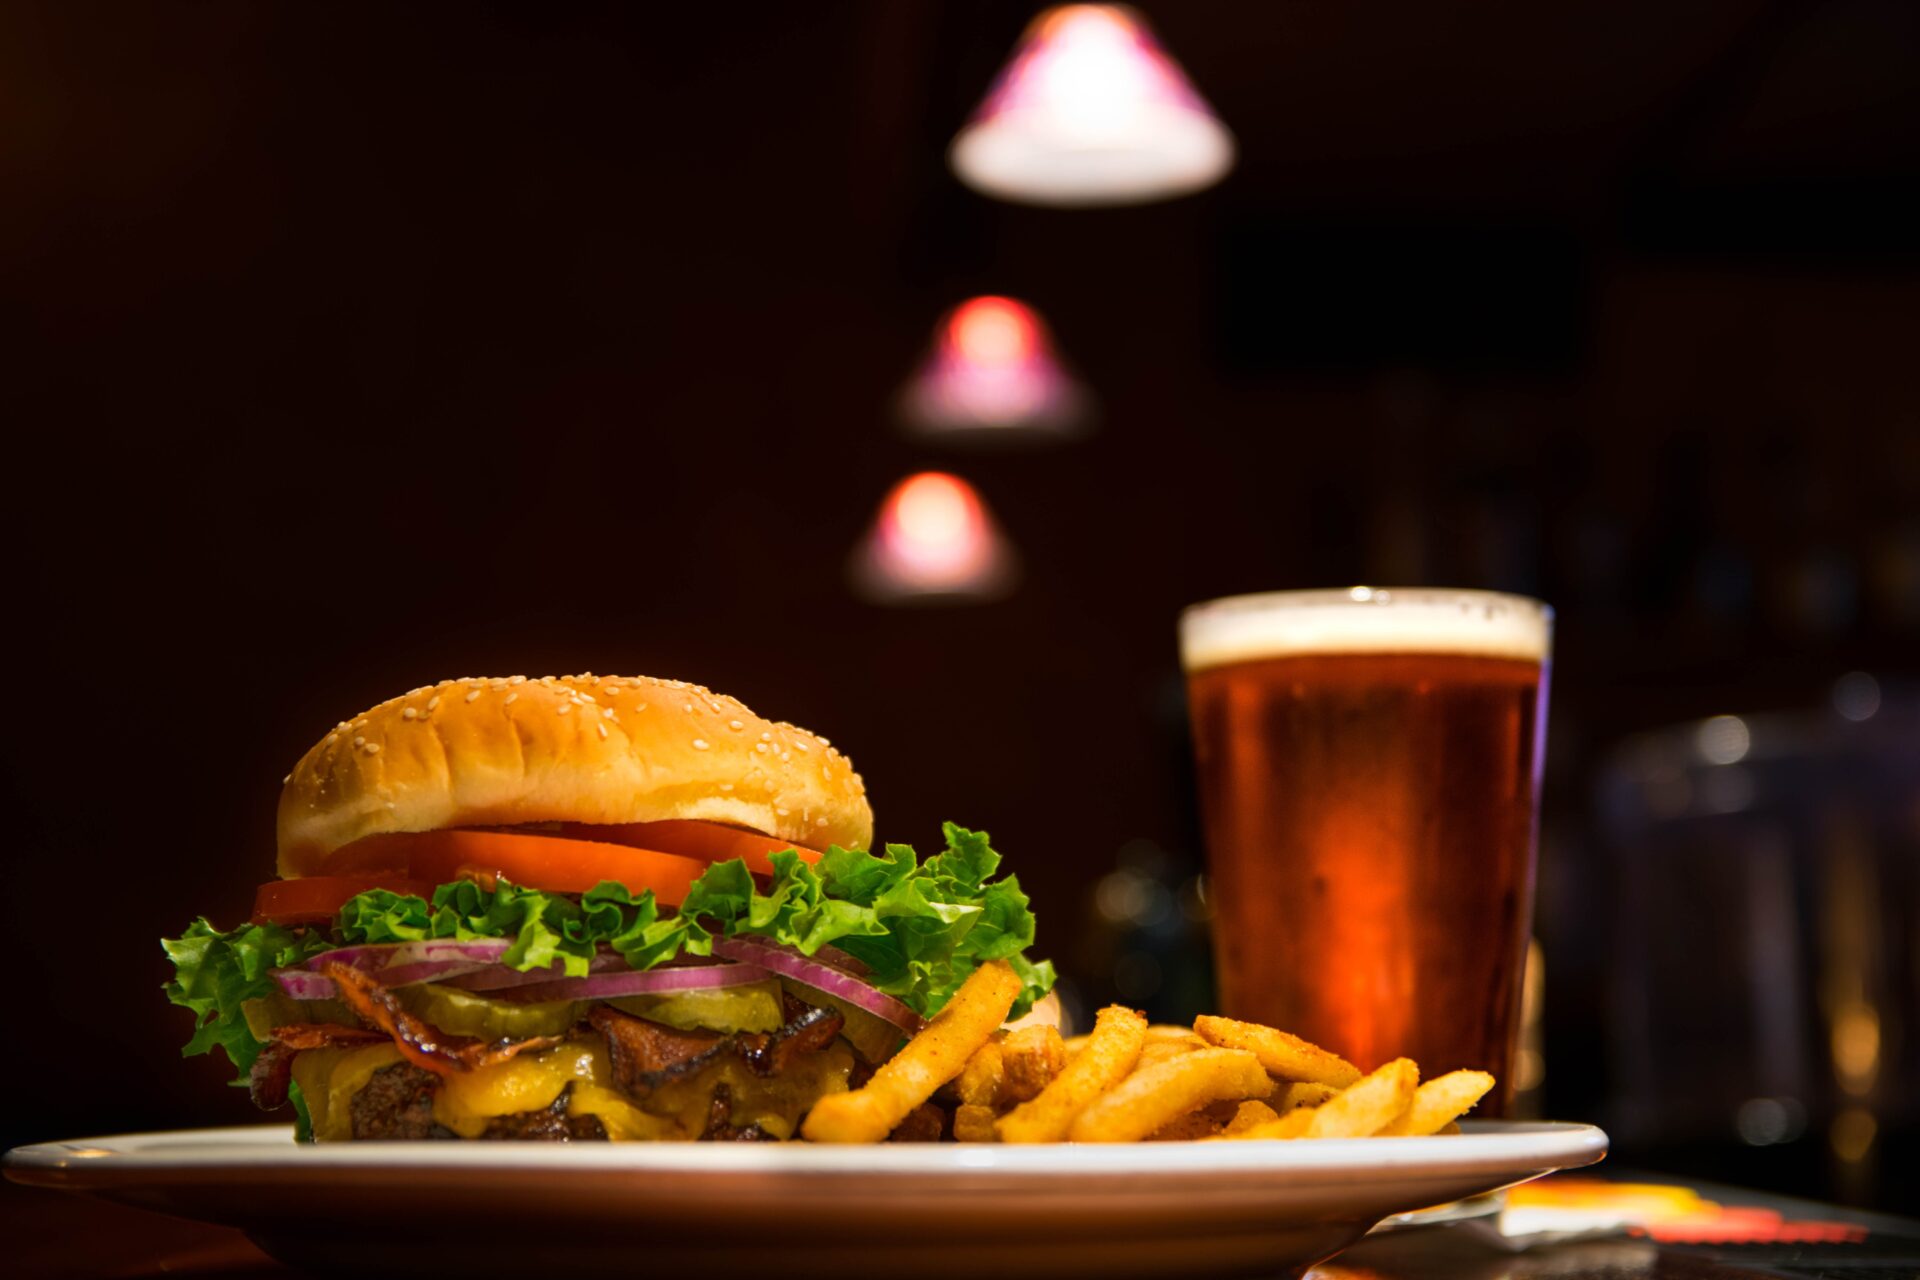 burger and fries on the plate against the glass of beer 